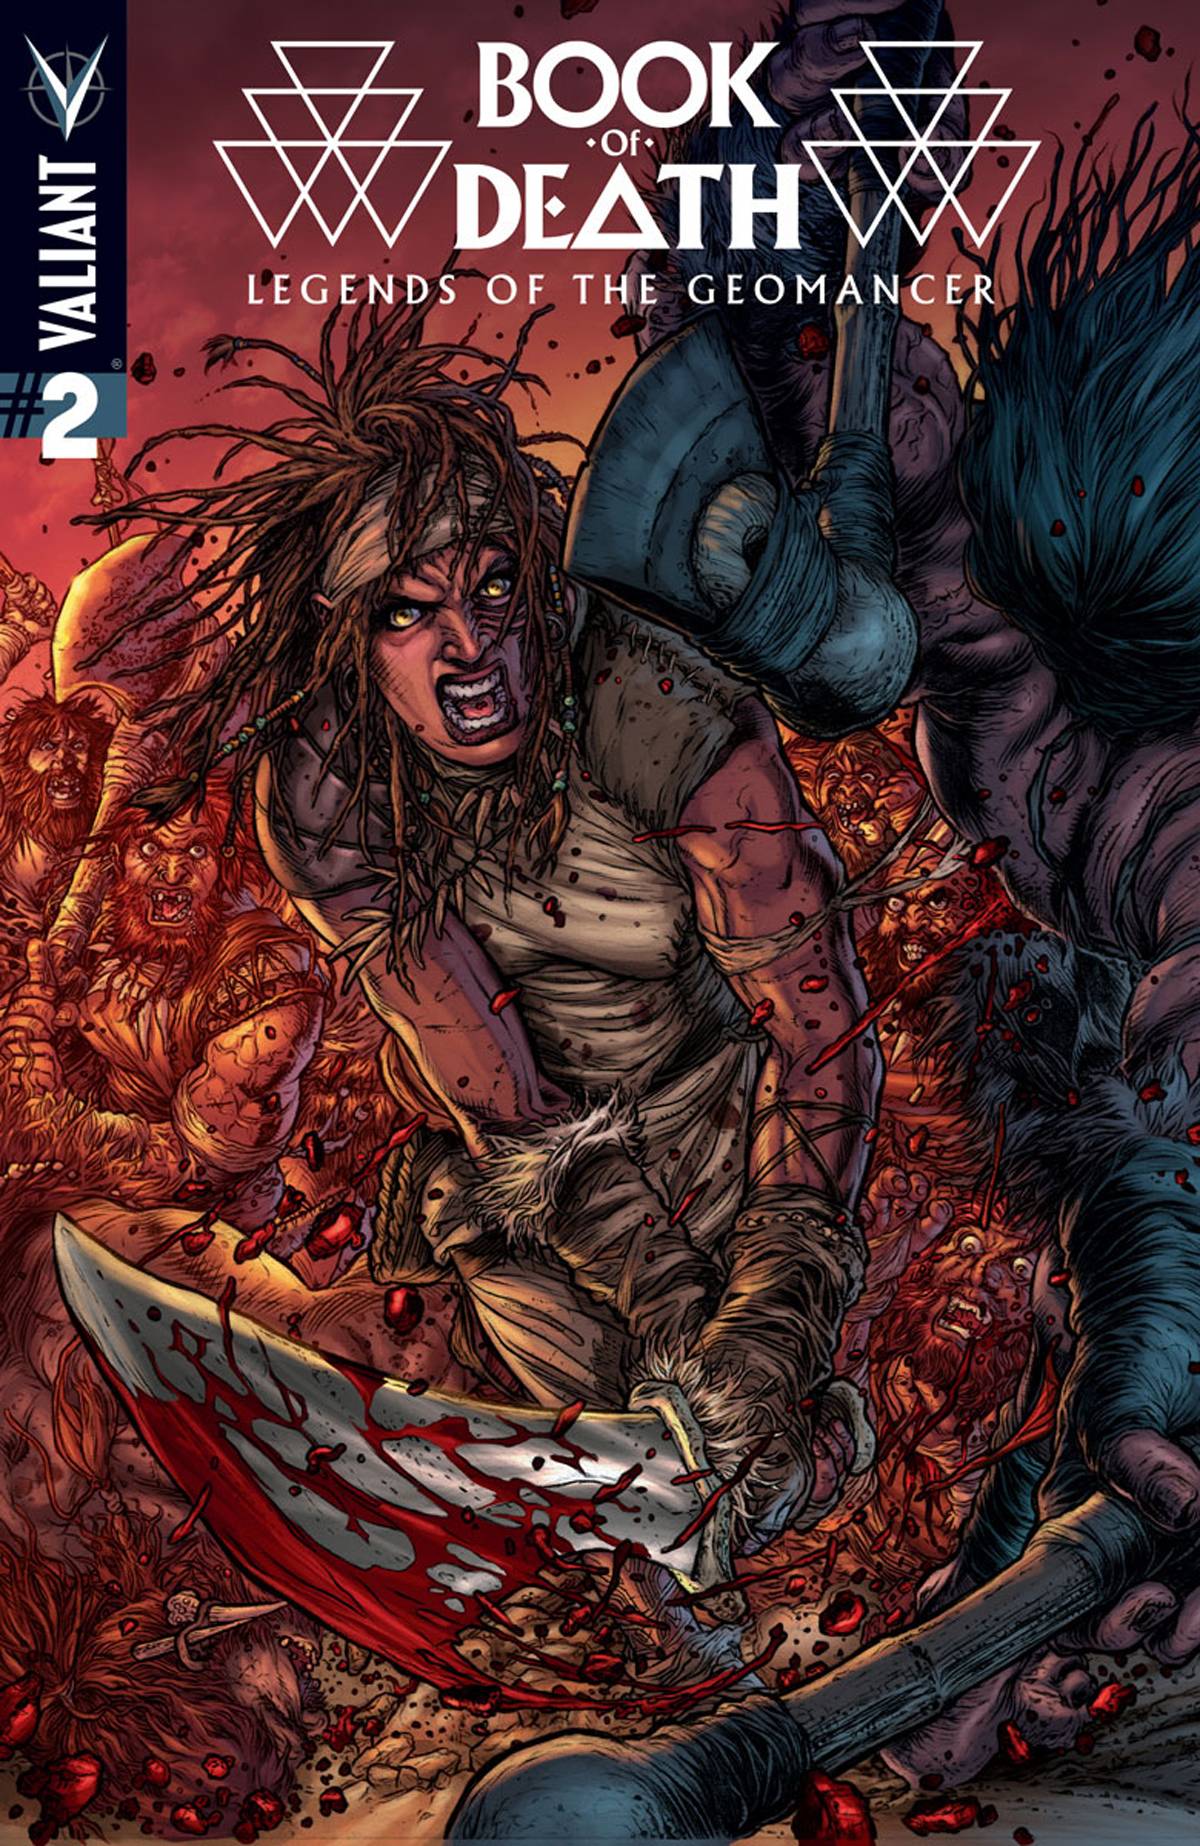 Book of Death Legends of Geomancer #2 1 for 10 Incentive